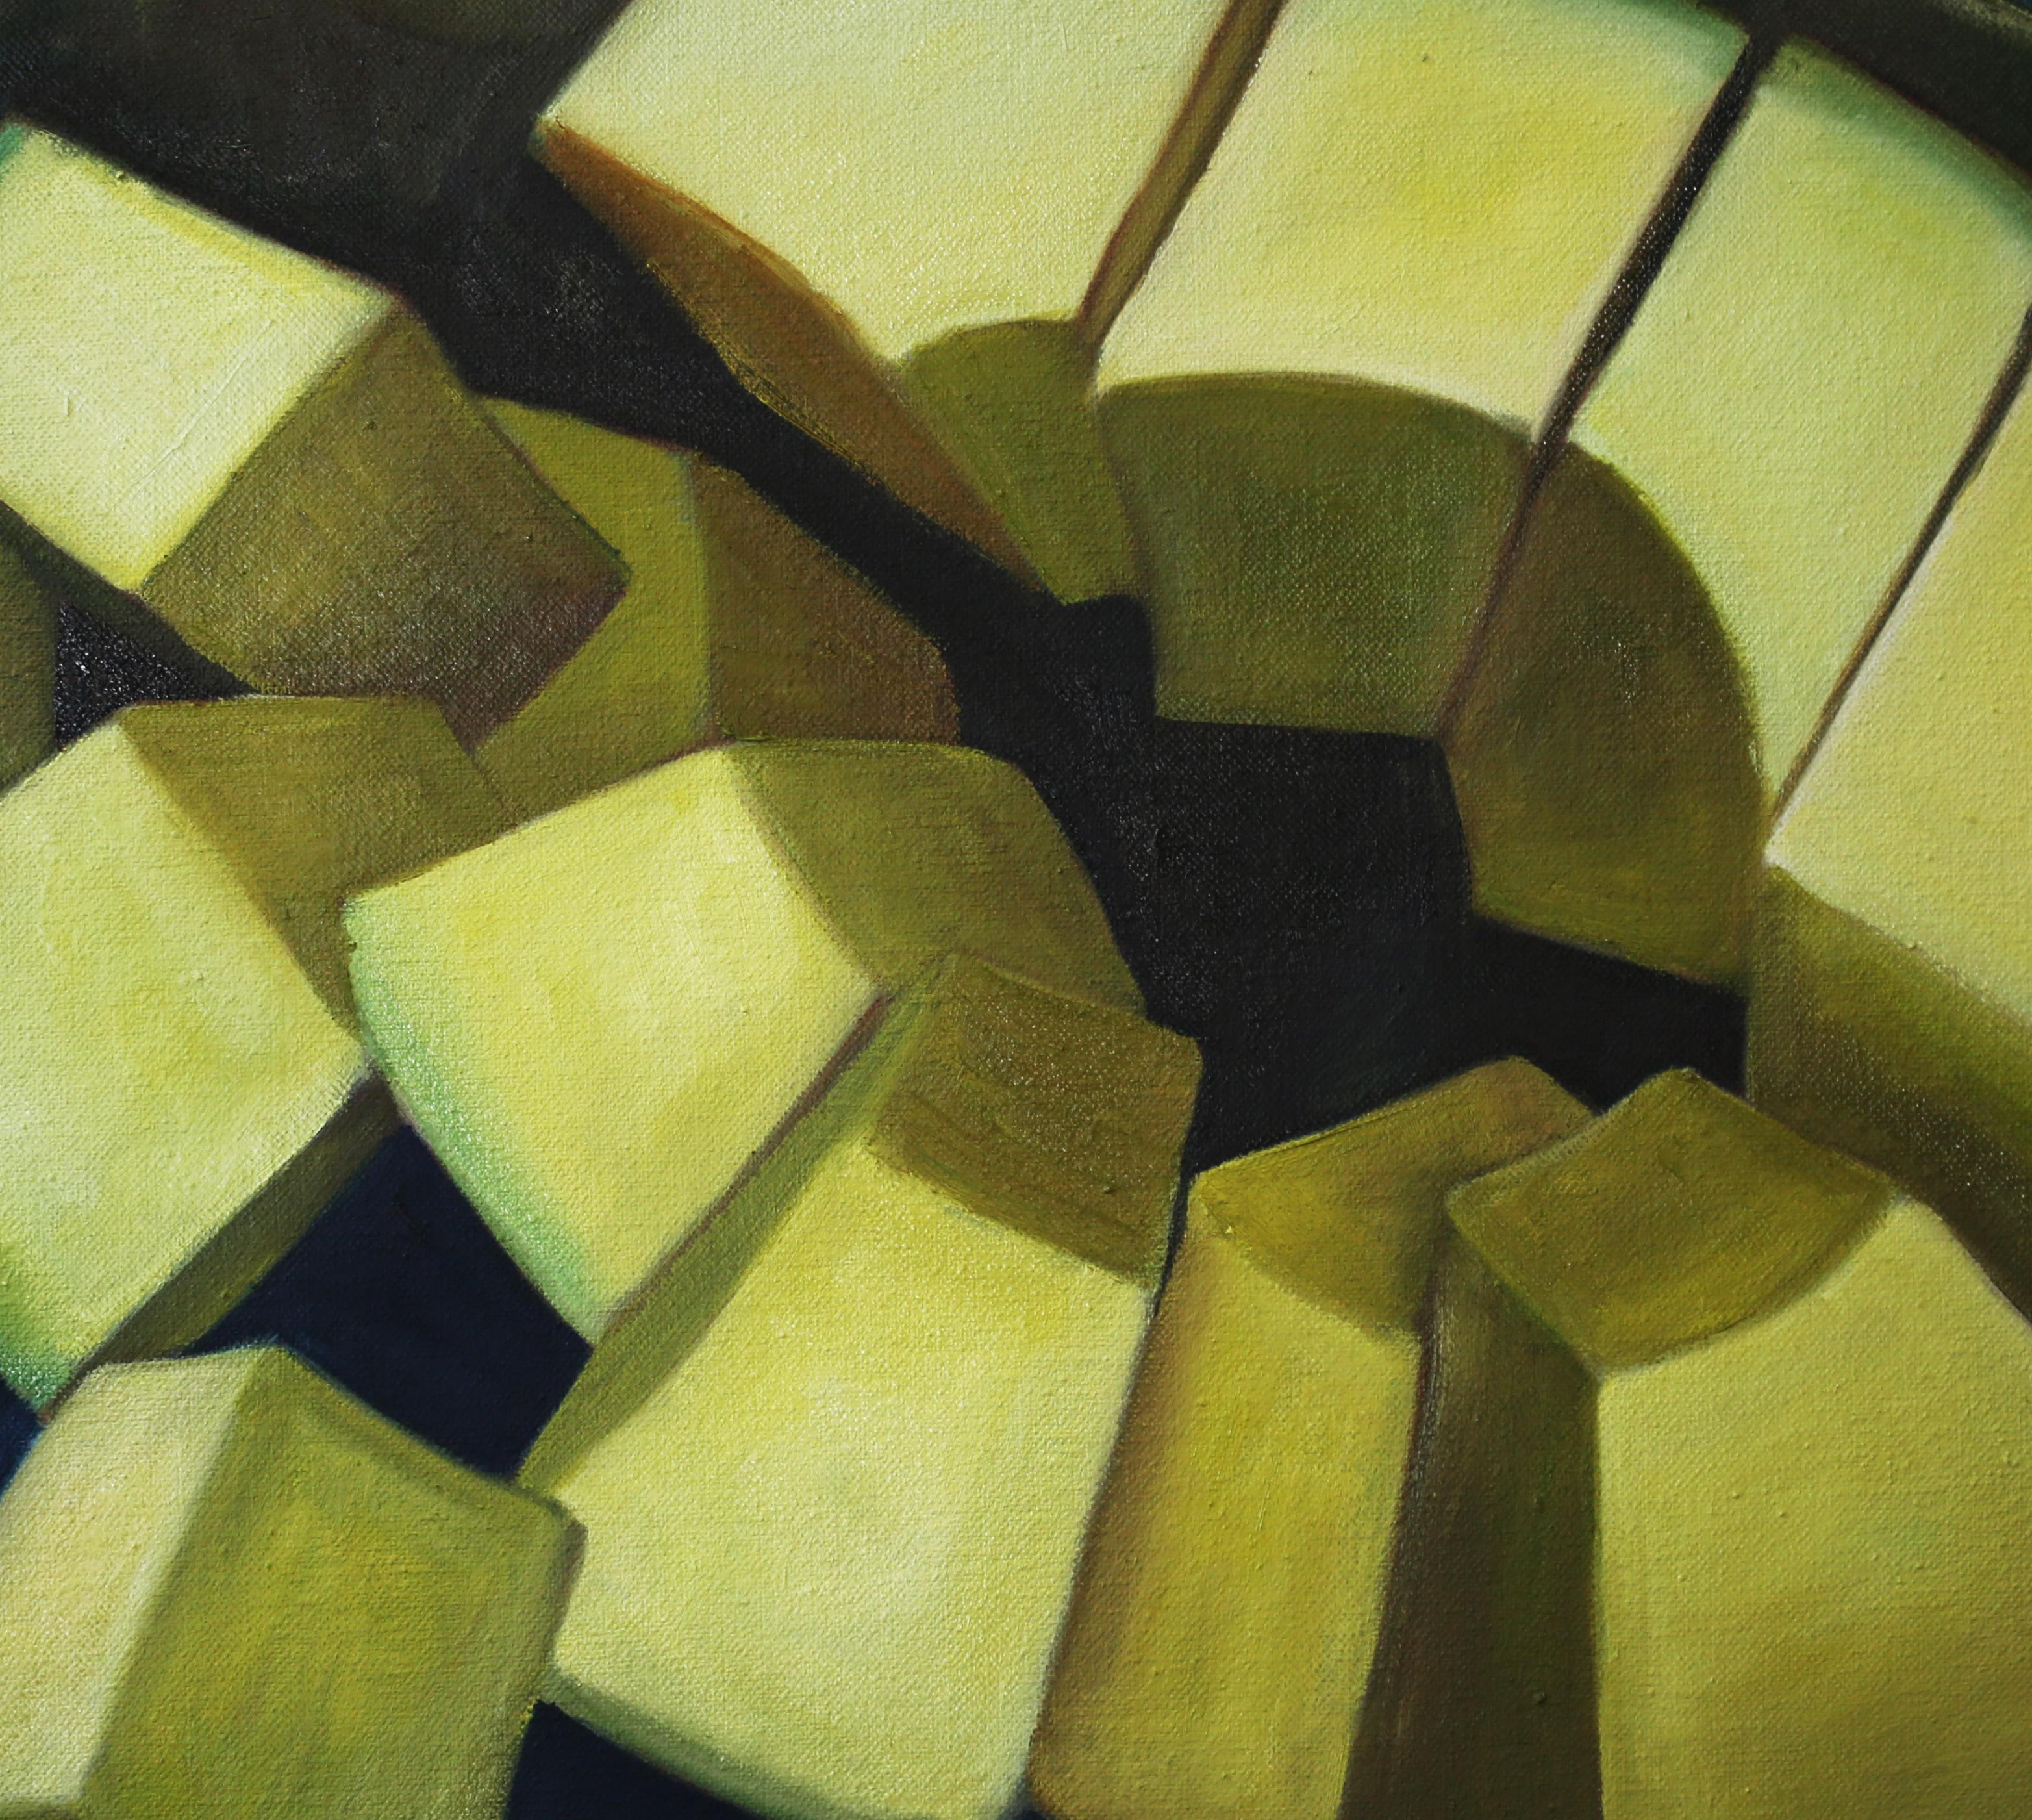 Avocado Slices, Oil Painting - Black Still-Life Painting by JJ Galloway